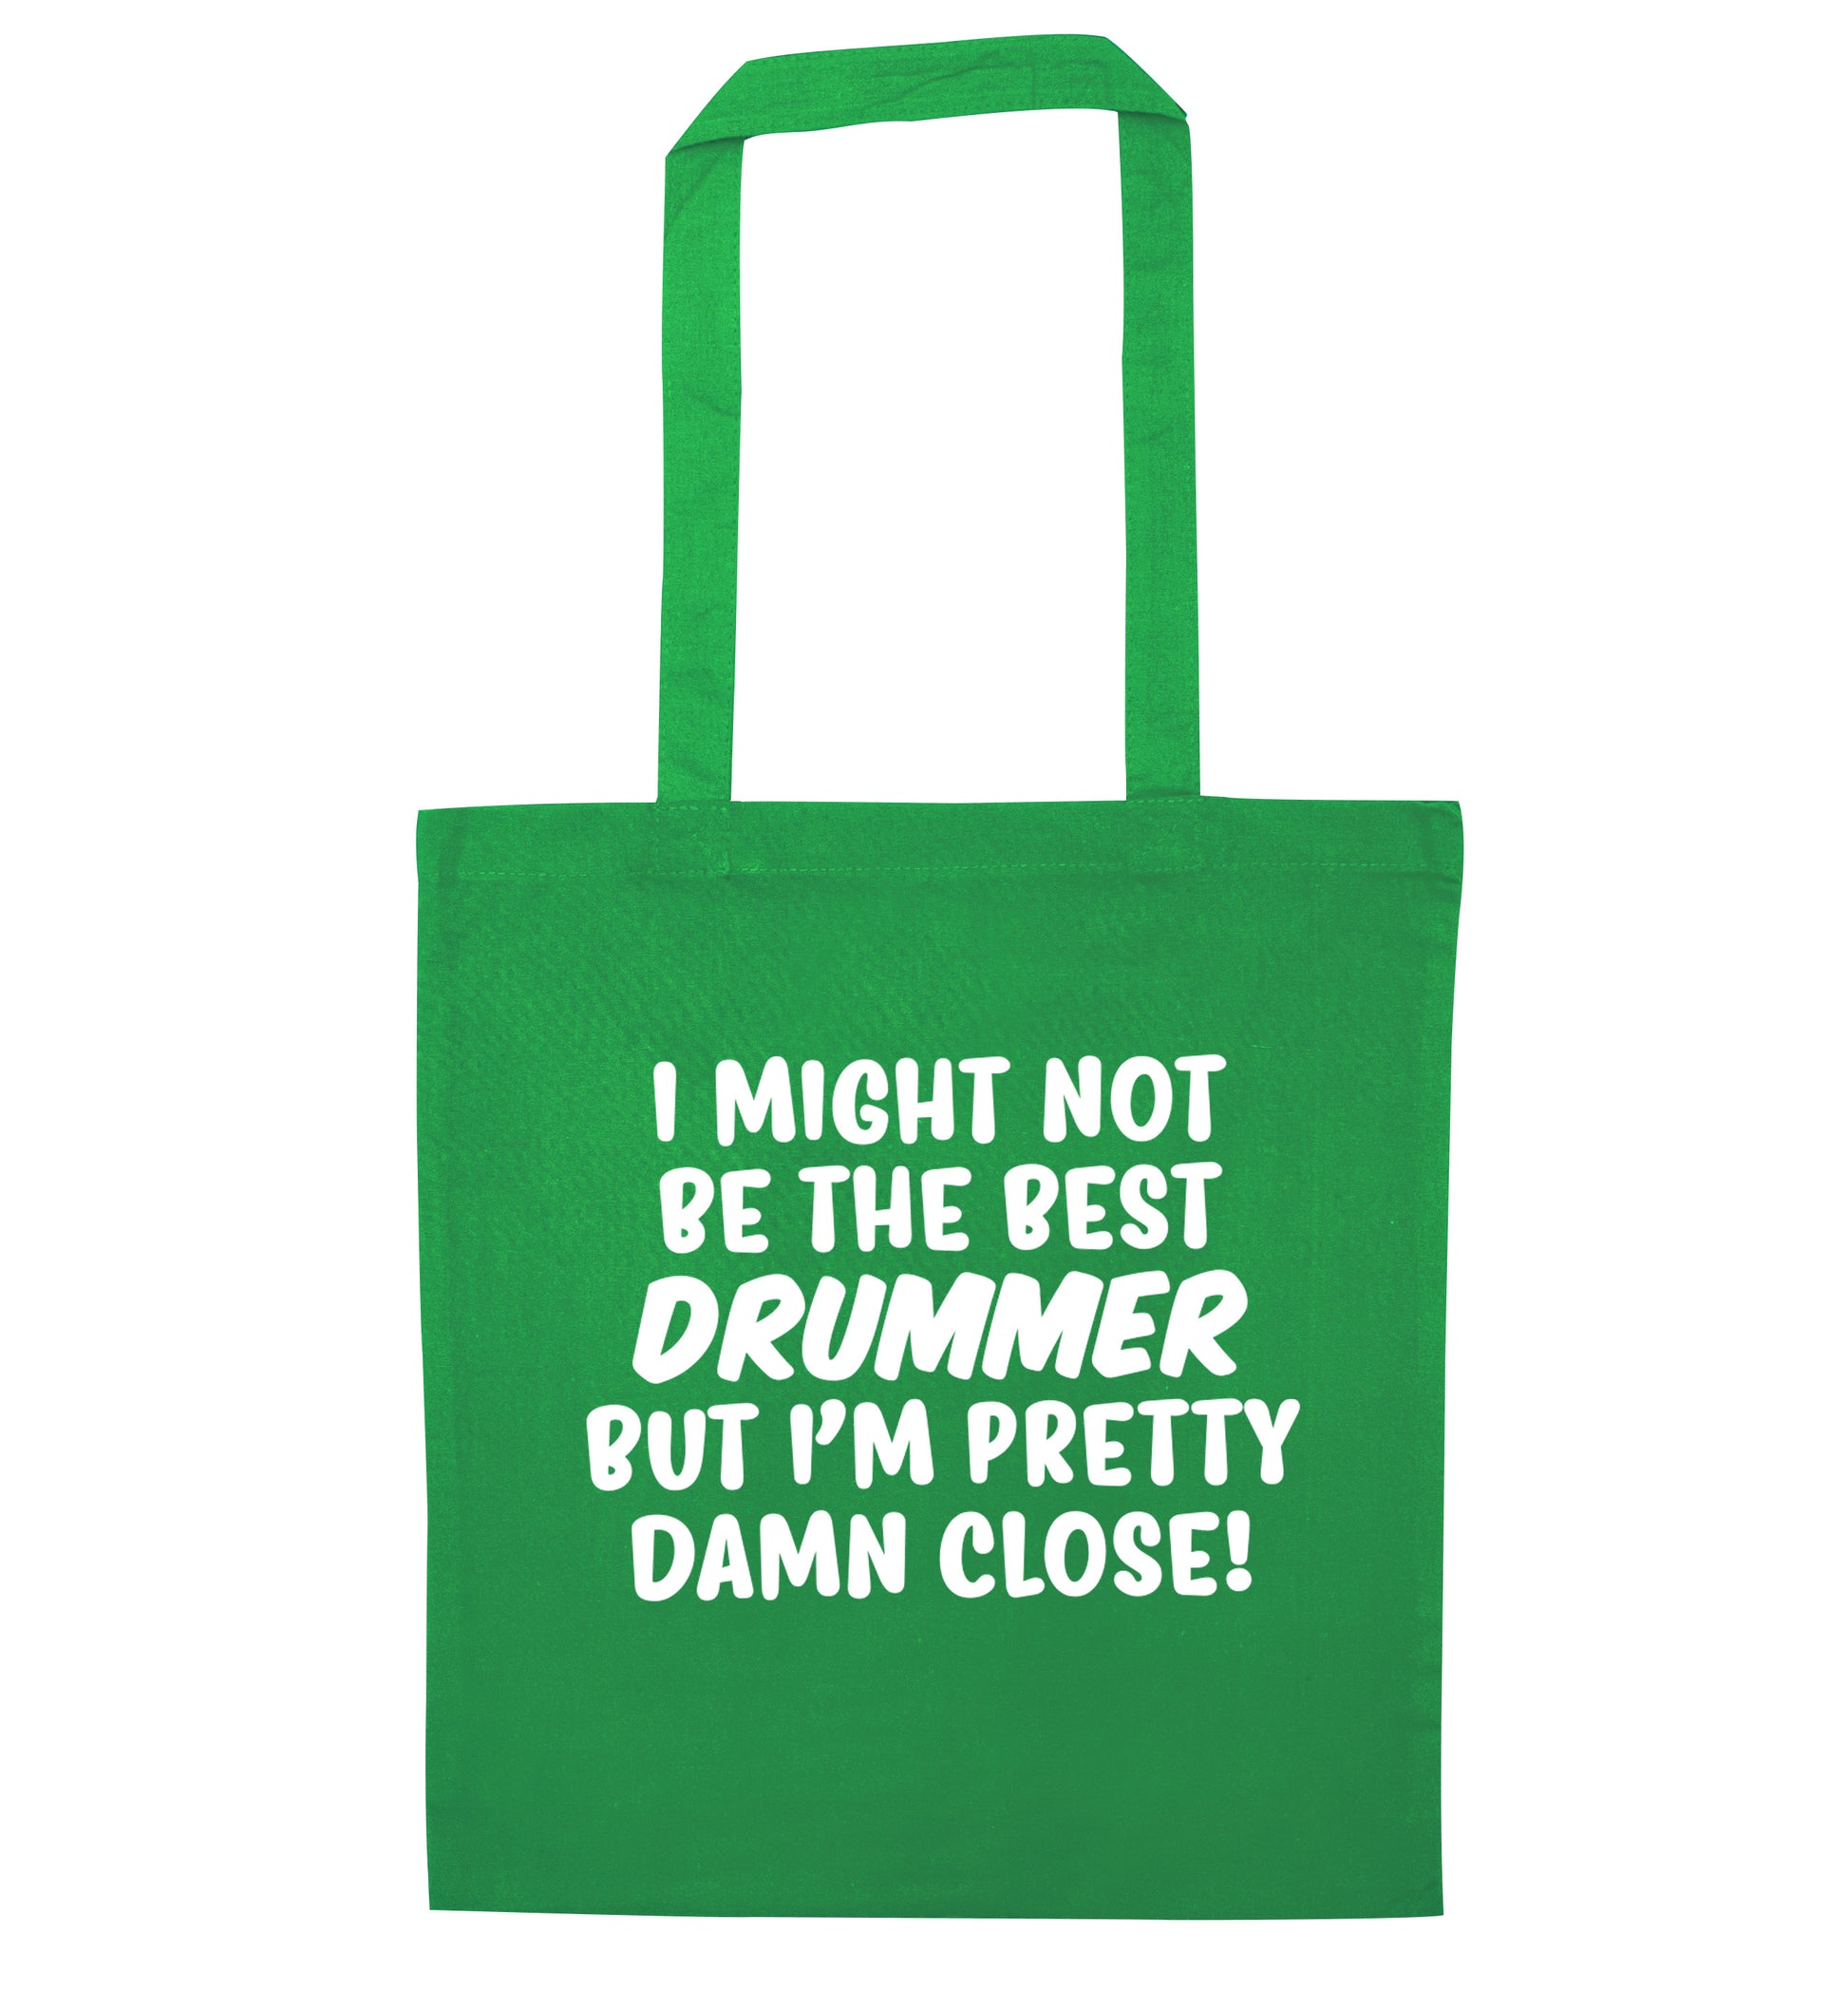 I might not be the best drummer but I'm pretty close! green tote bag